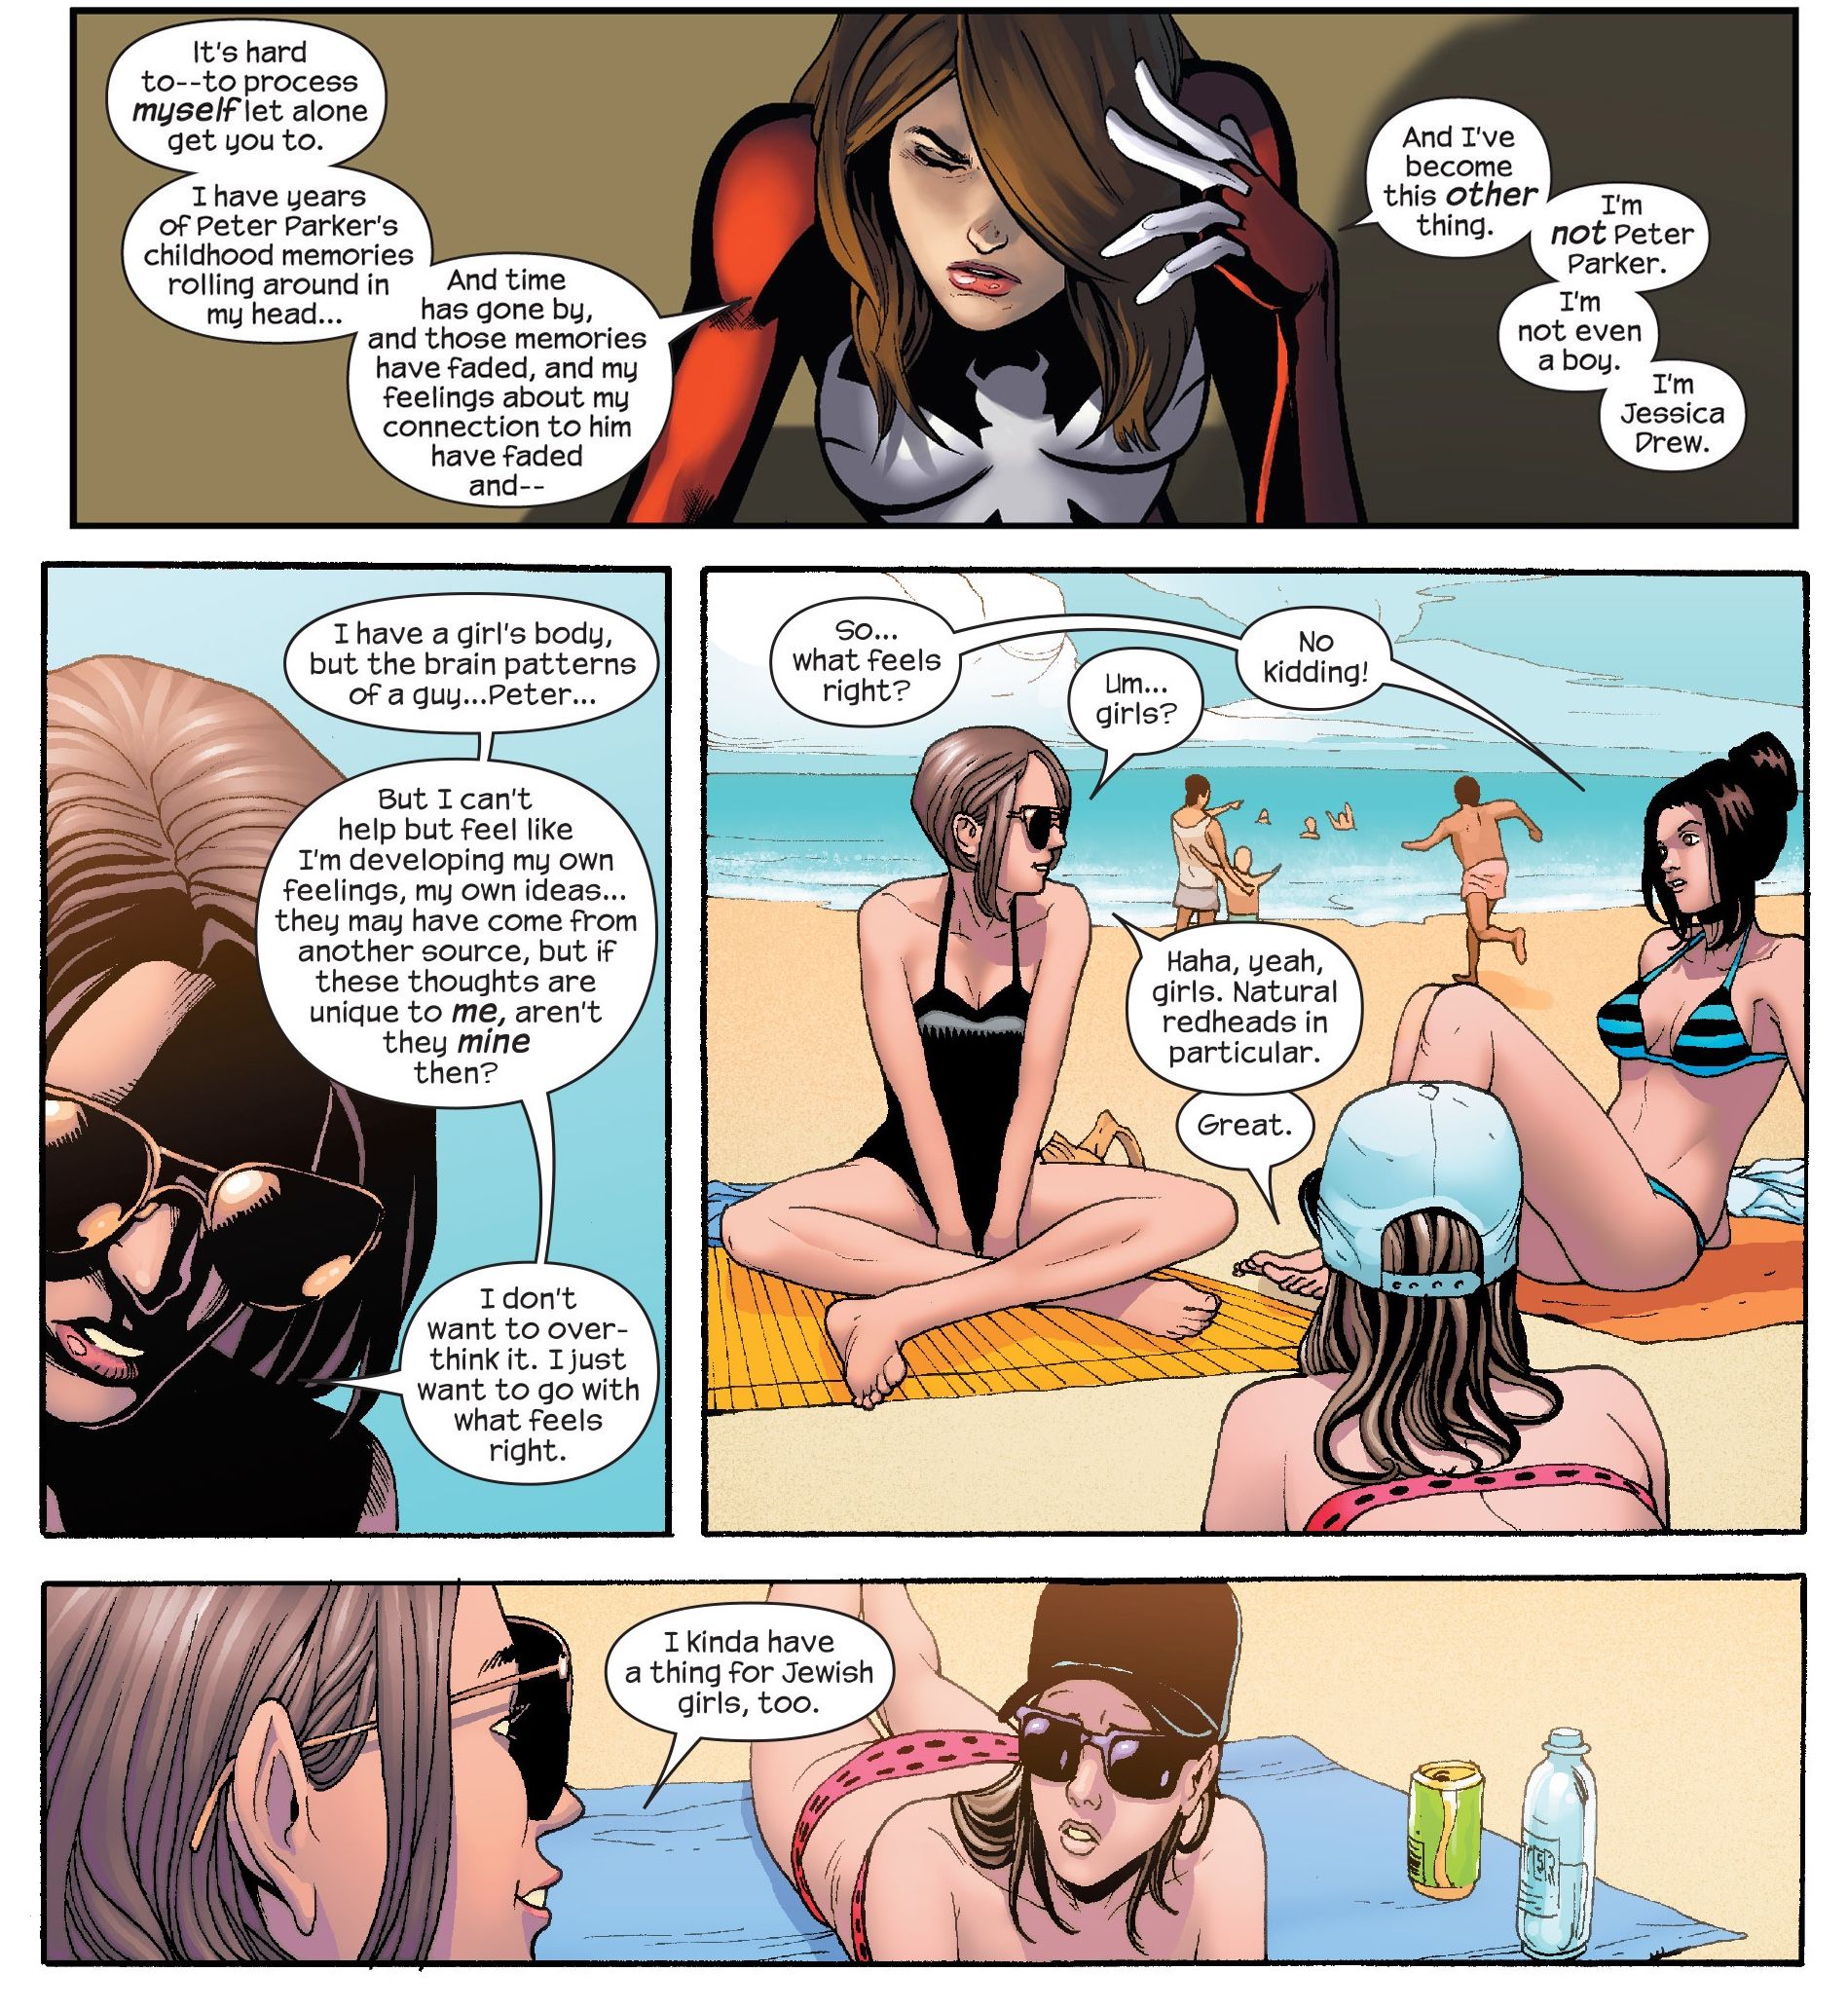 Ultimate Spider-Woman talks gender and sexuality.